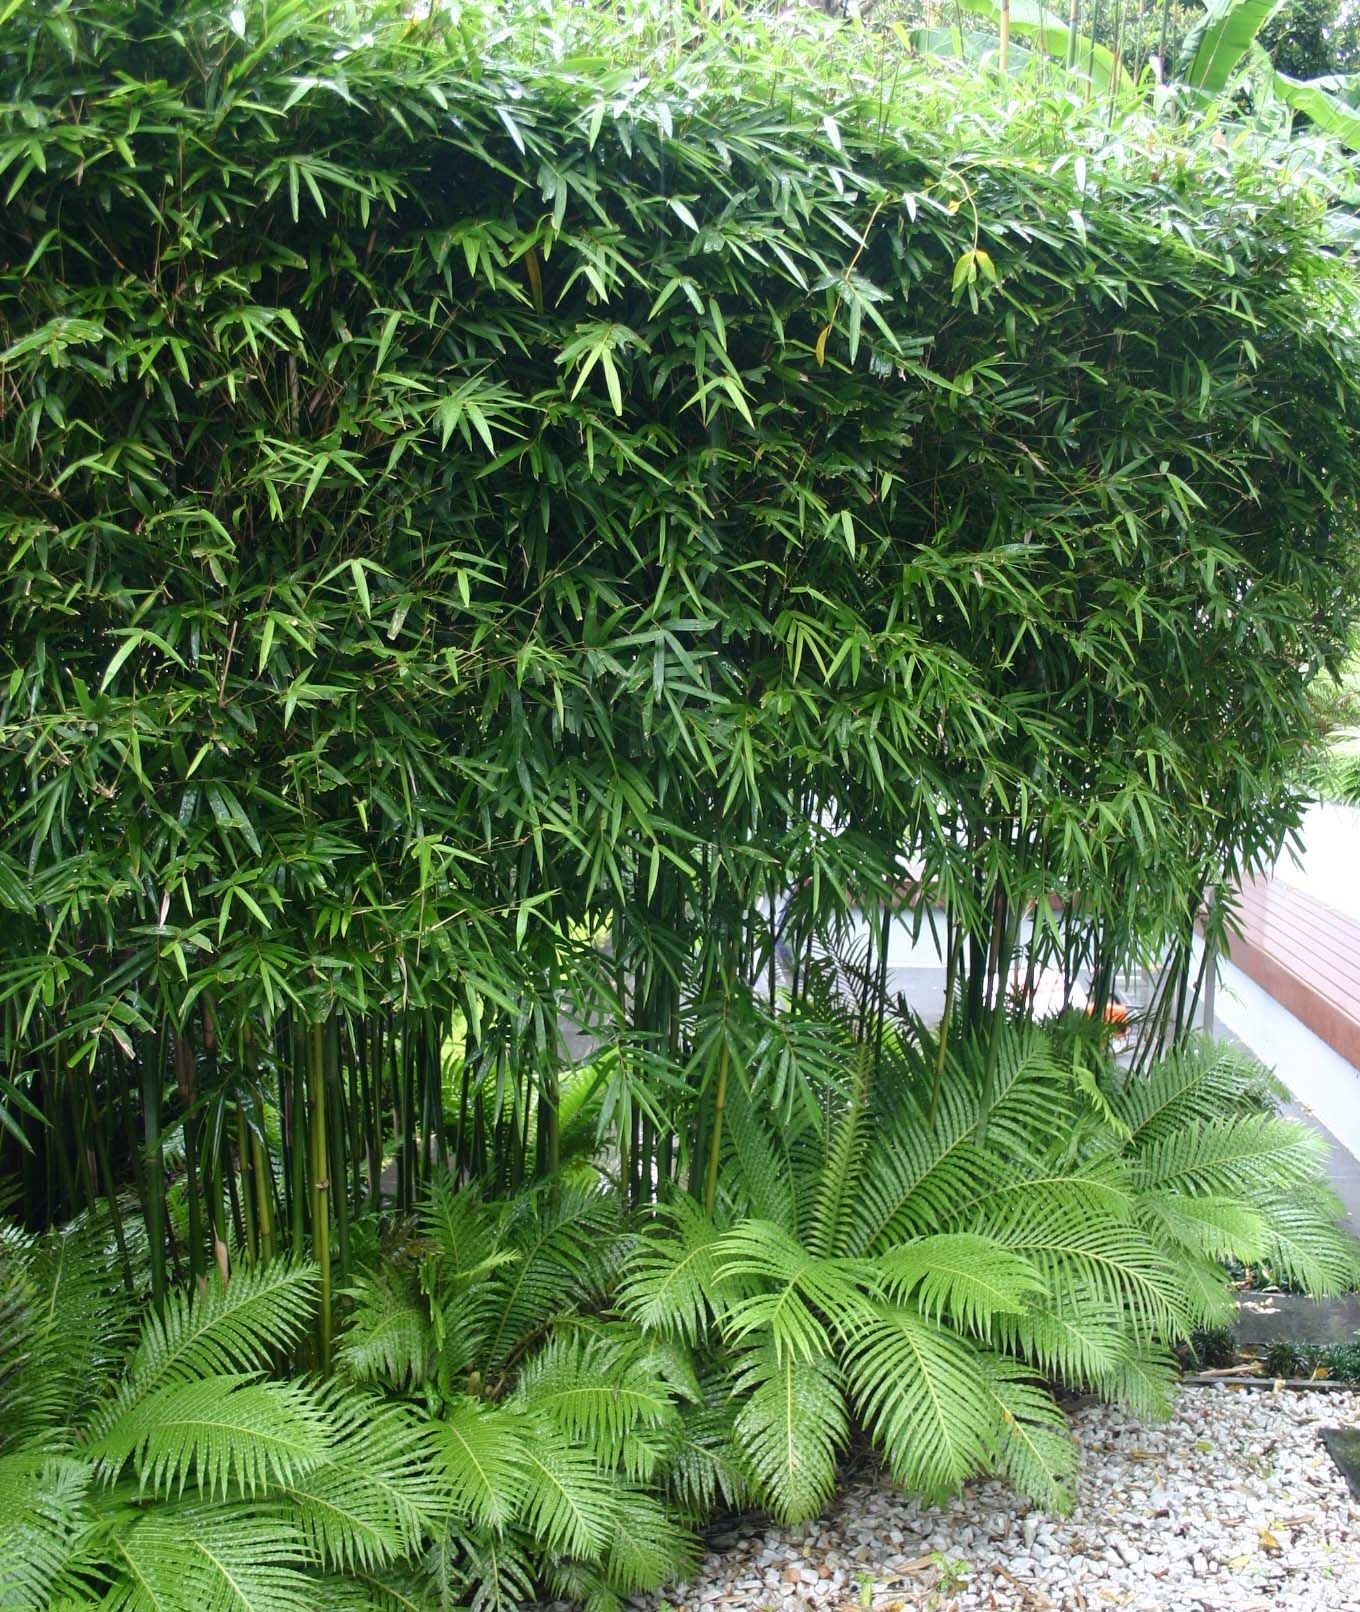 We like the little ferns at the bottom, to use along the side of the house Bamboo -Gracillis